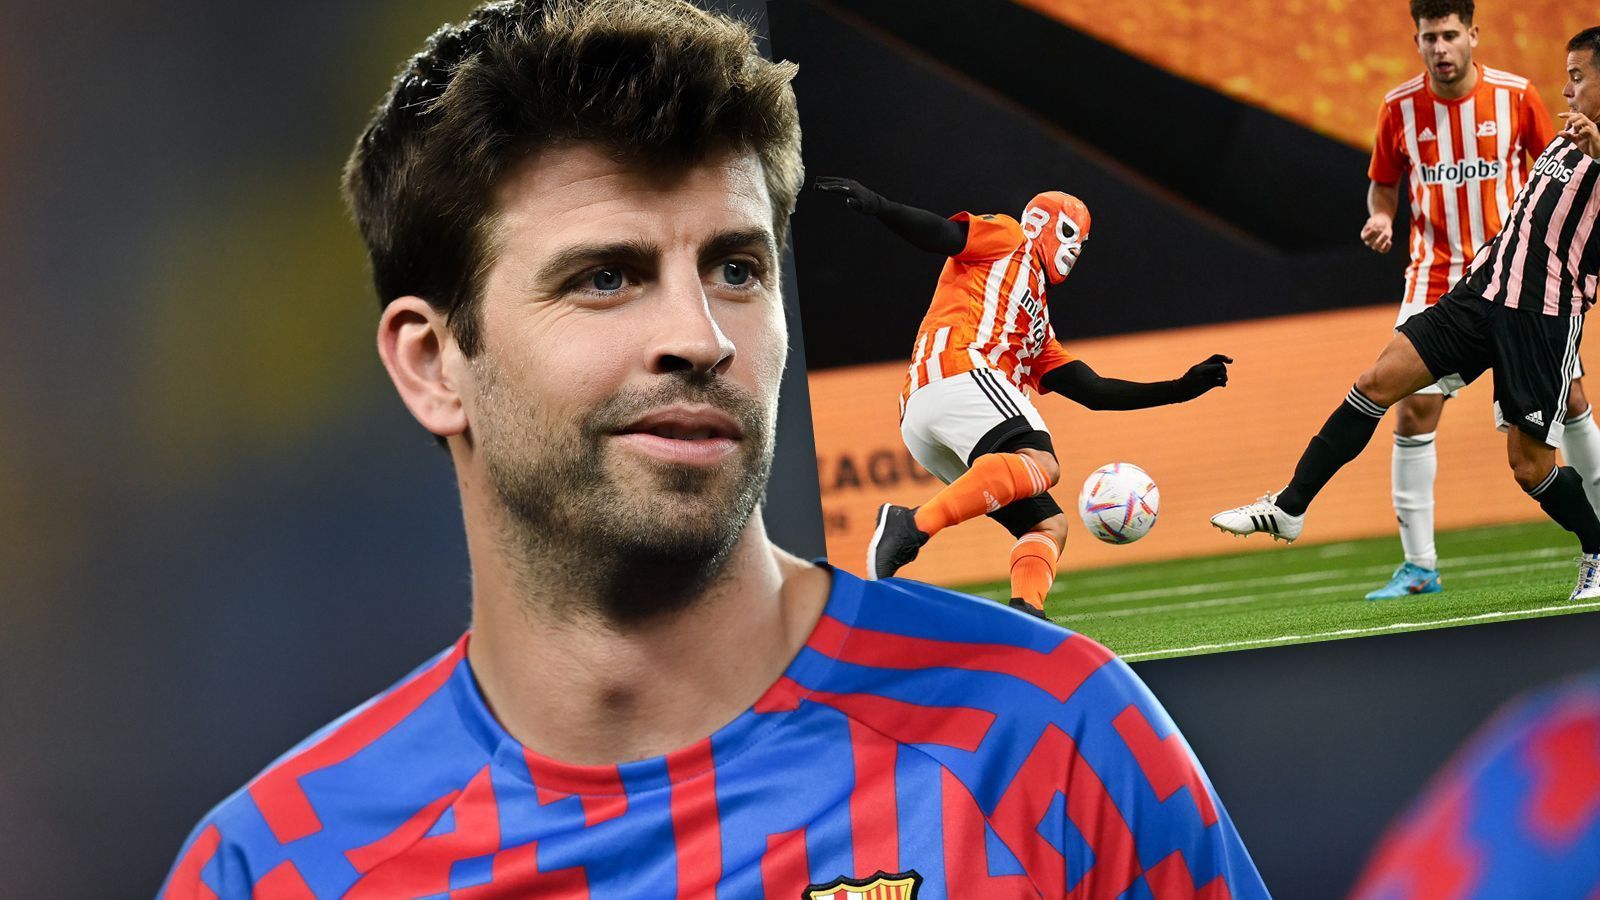 Who is Enigma and what is the Gerard Pique-run Kings League? - BBC Sport